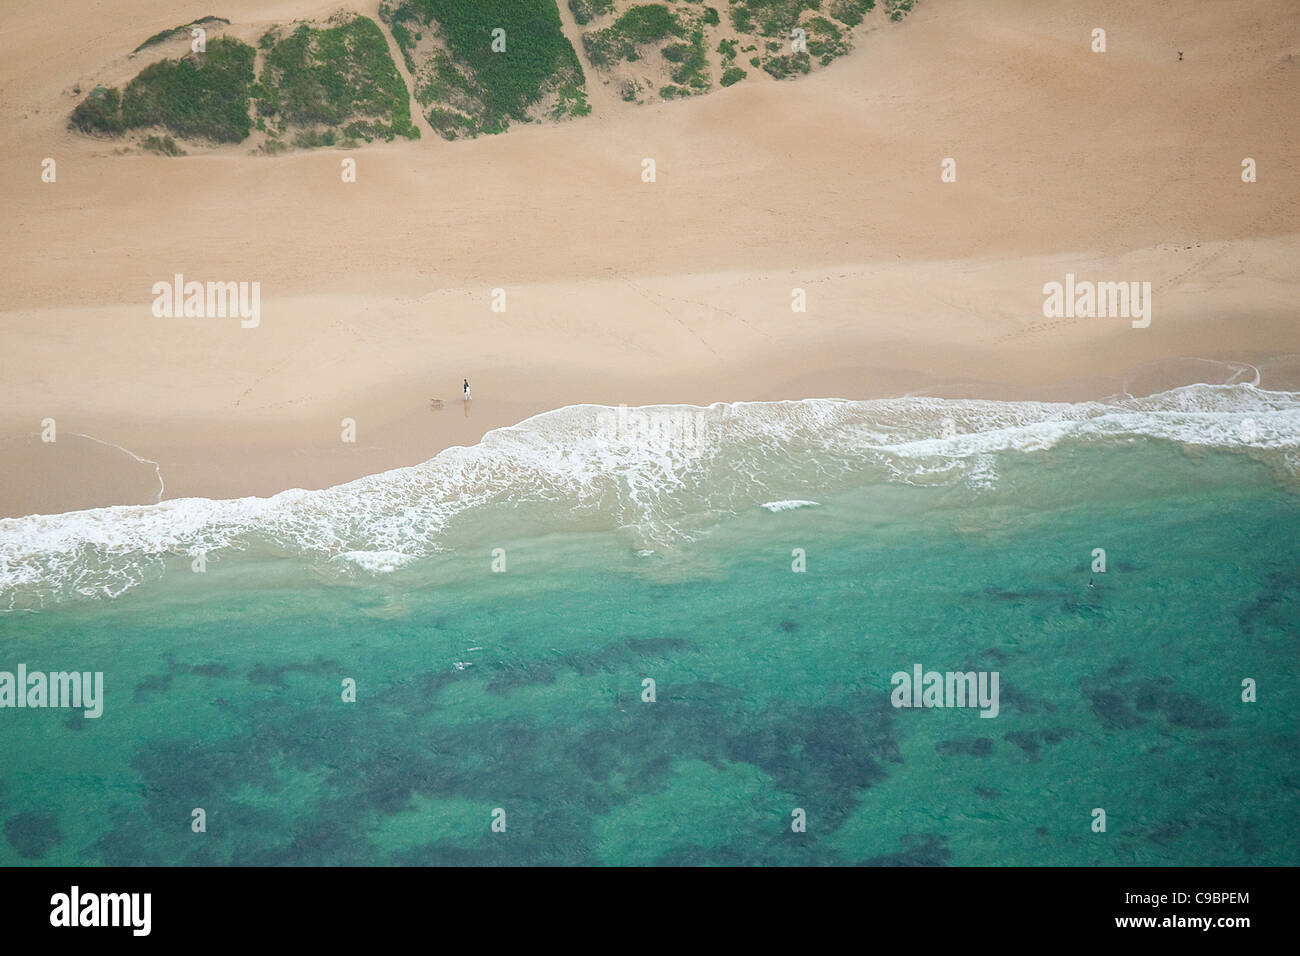 Aerial view of Sea view Beach, Port Elizabeth, Eastern Cape Province, South Africa Stock Photo